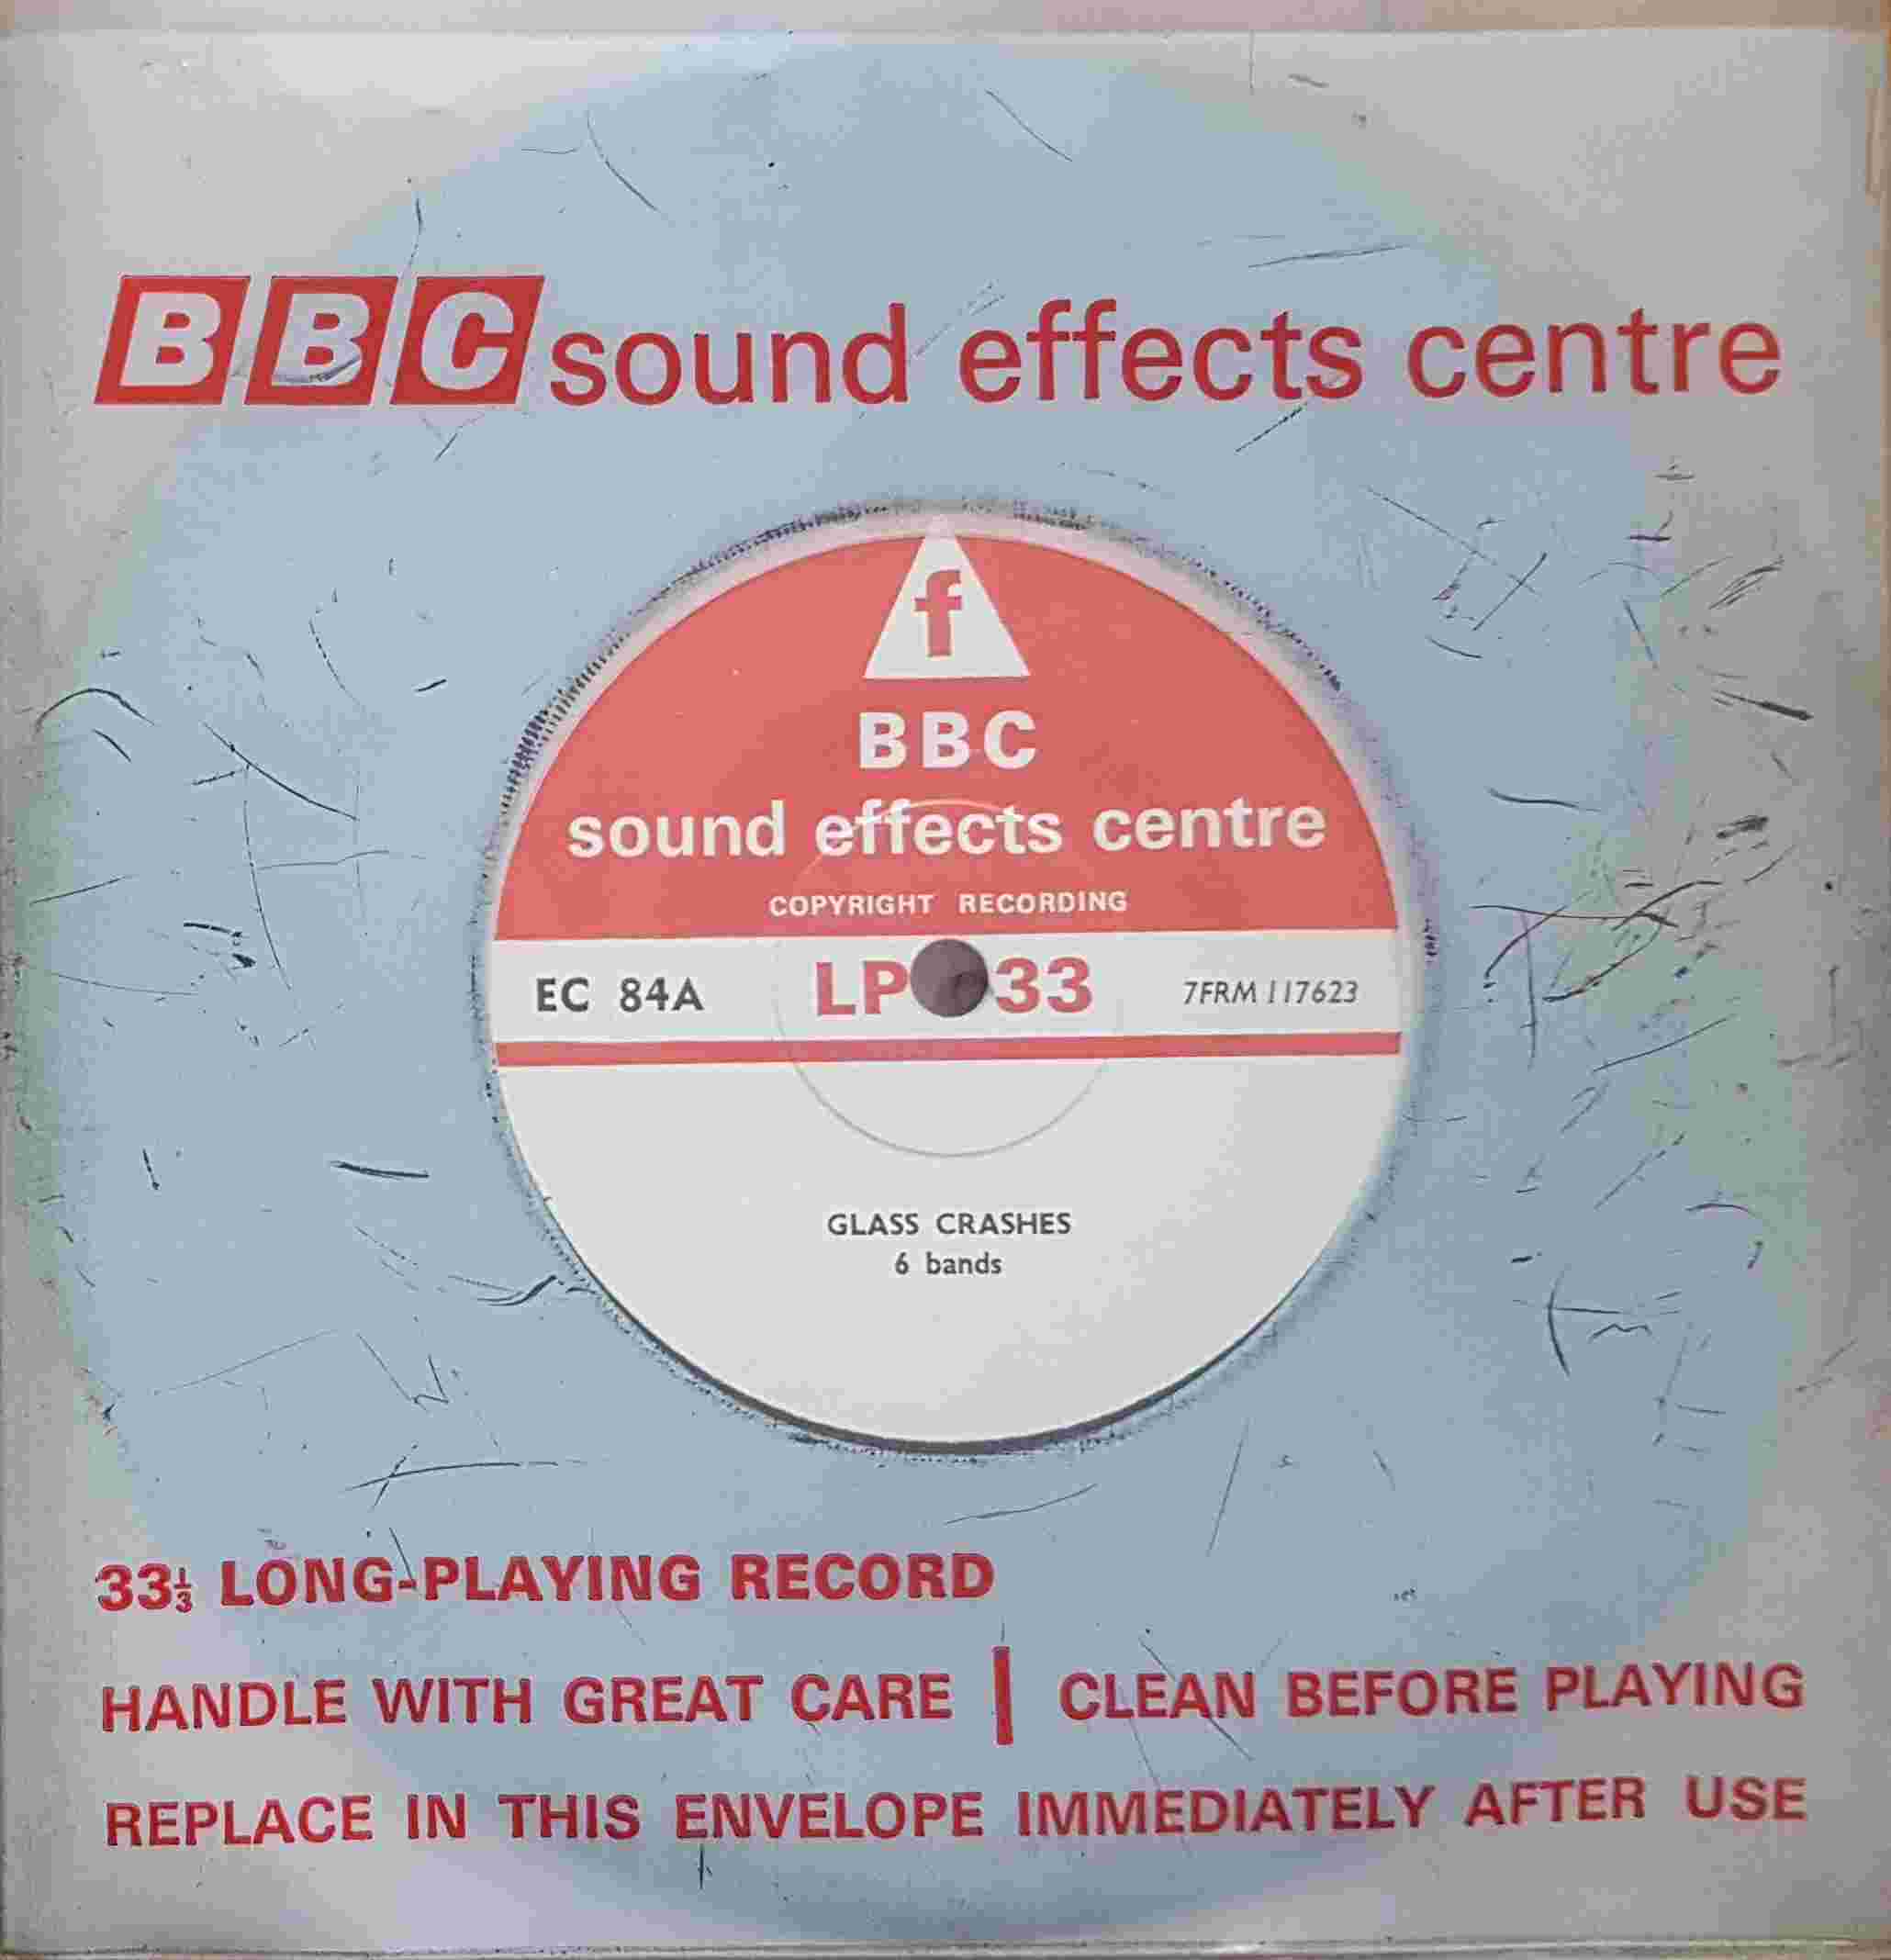 Picture of EC 84A Glass crashes by artist Not registered from the BBC singles - Records and Tapes library